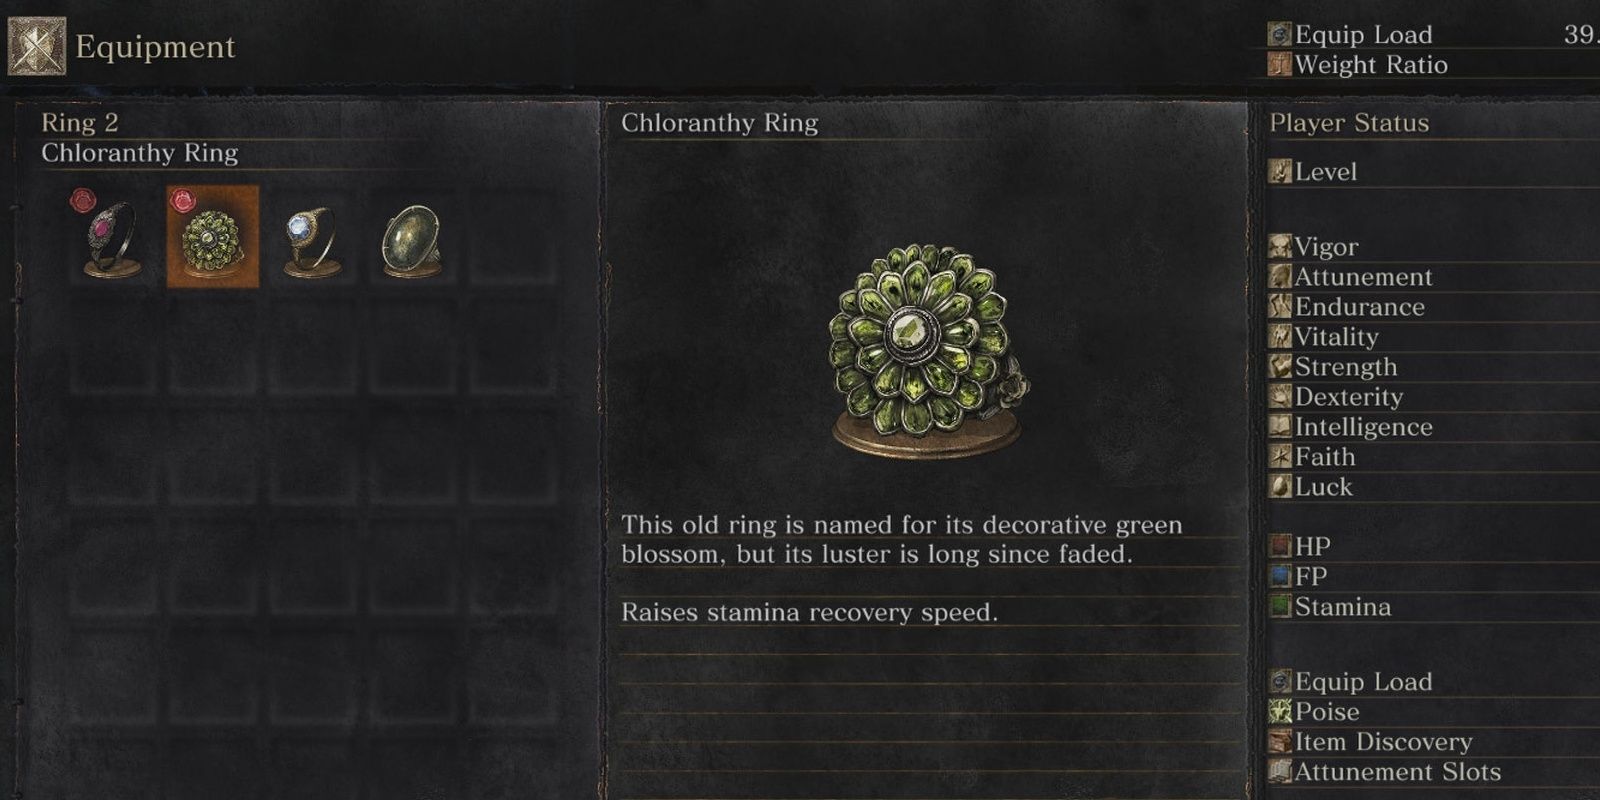 Chloranthy Rings in the Inventory